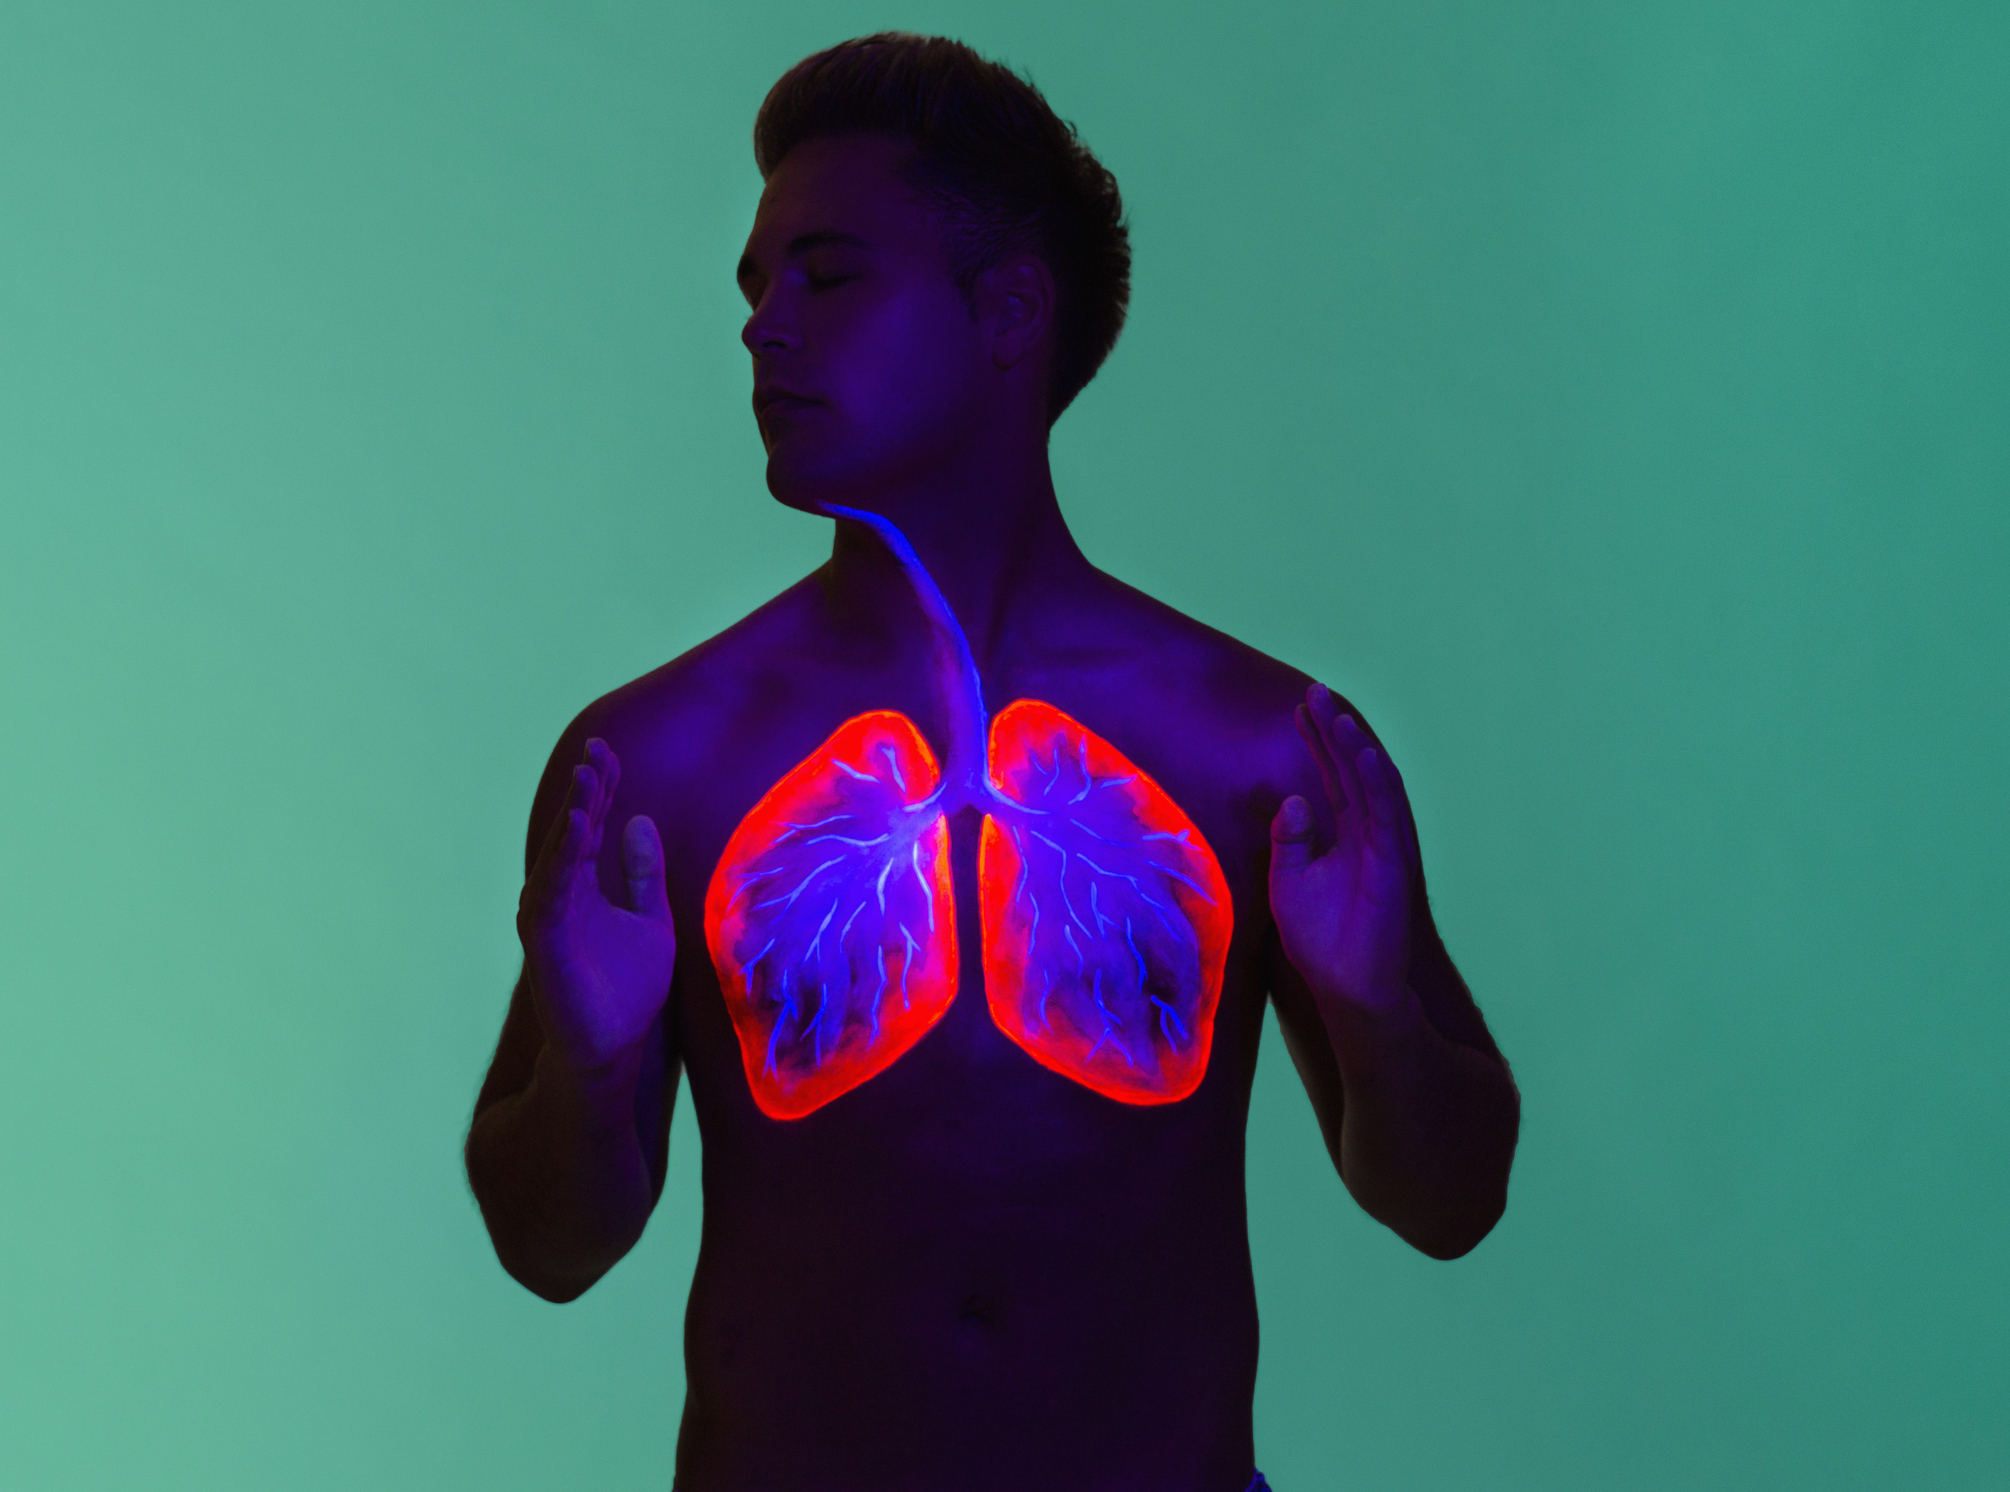 Person with illustrated lungs on chest, stance suggests health concept